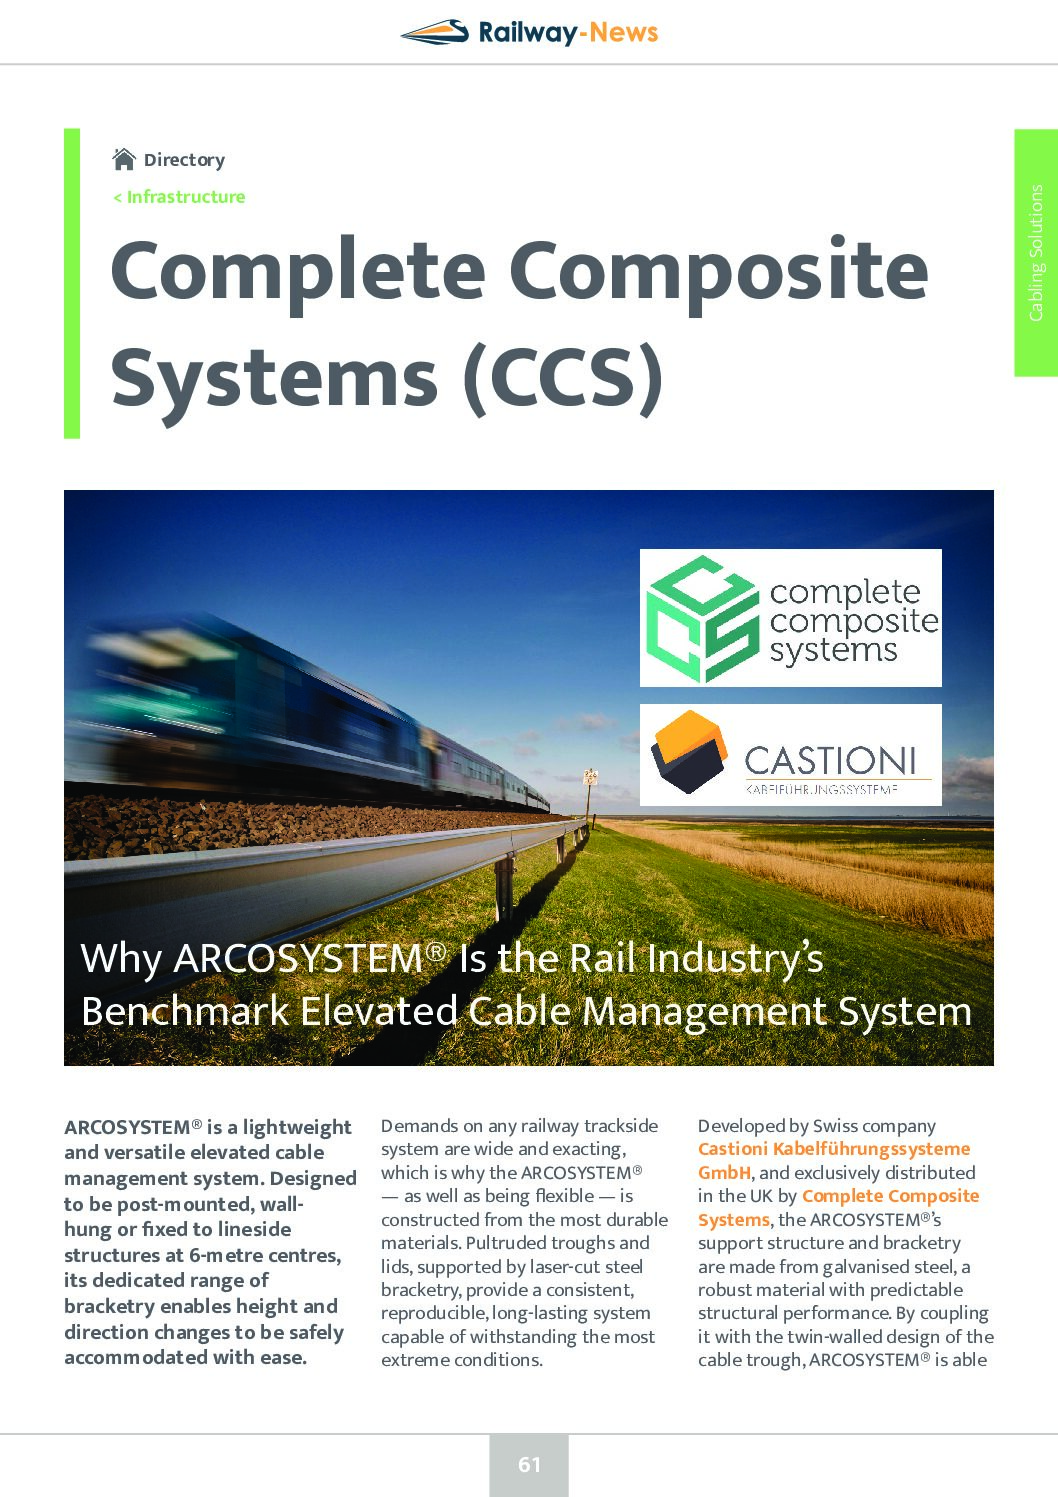 ARCOSYSTEM® is the Benchmark Elevated Cable Management System